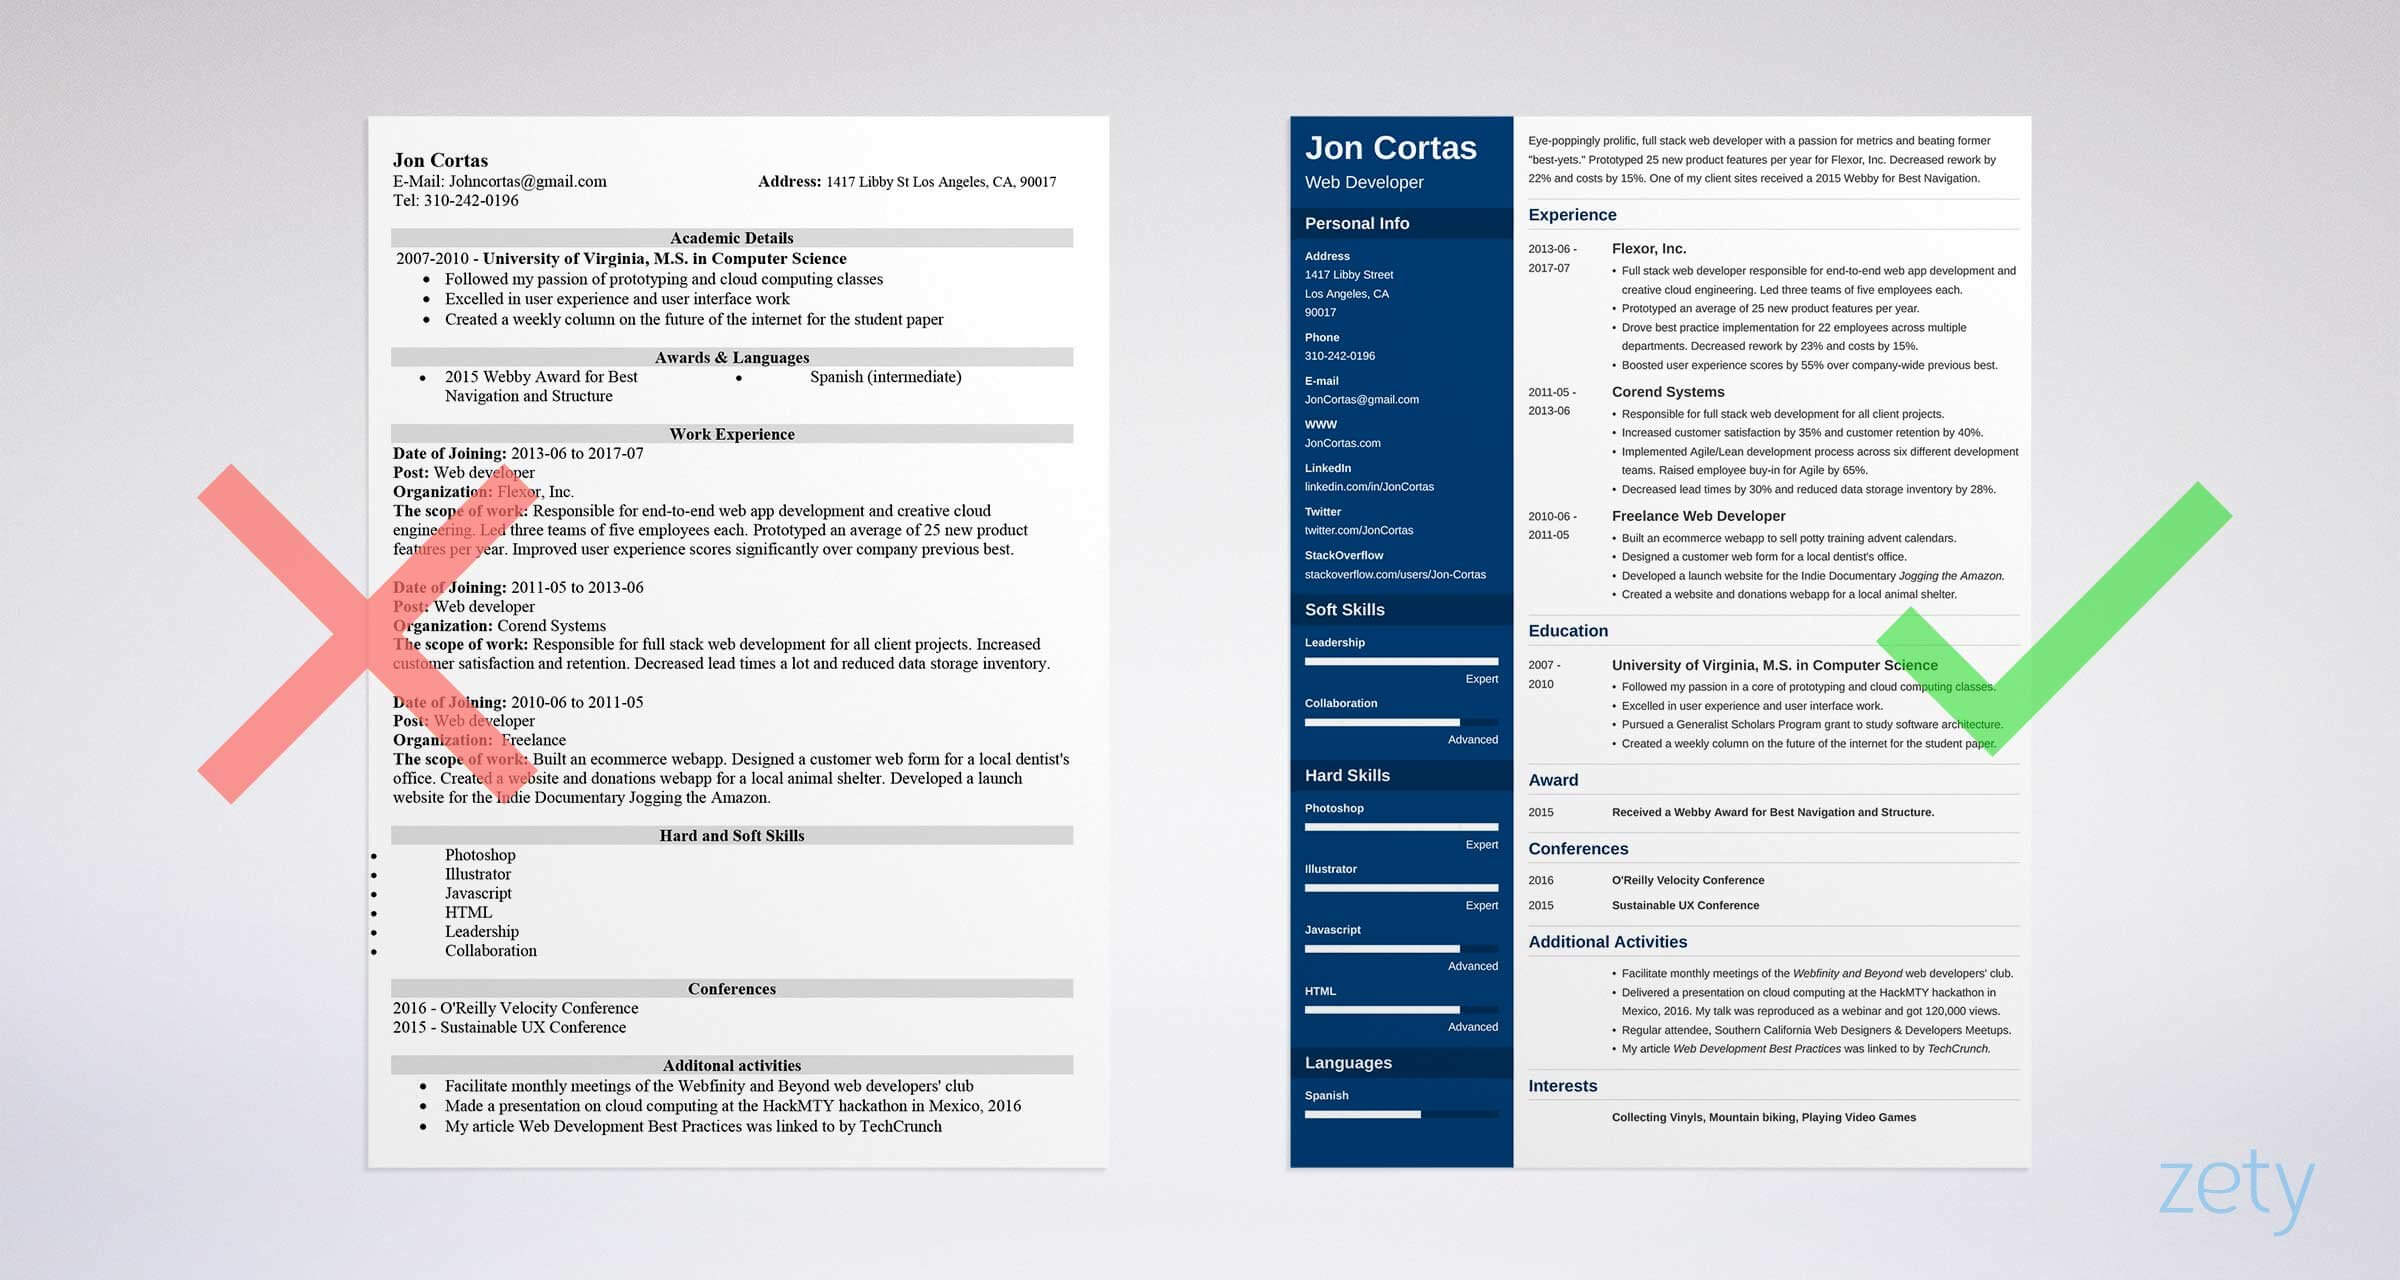 Free Resume Templates For Word: 15 Cv/resume Formats To Download For Resume Templates Word 2013